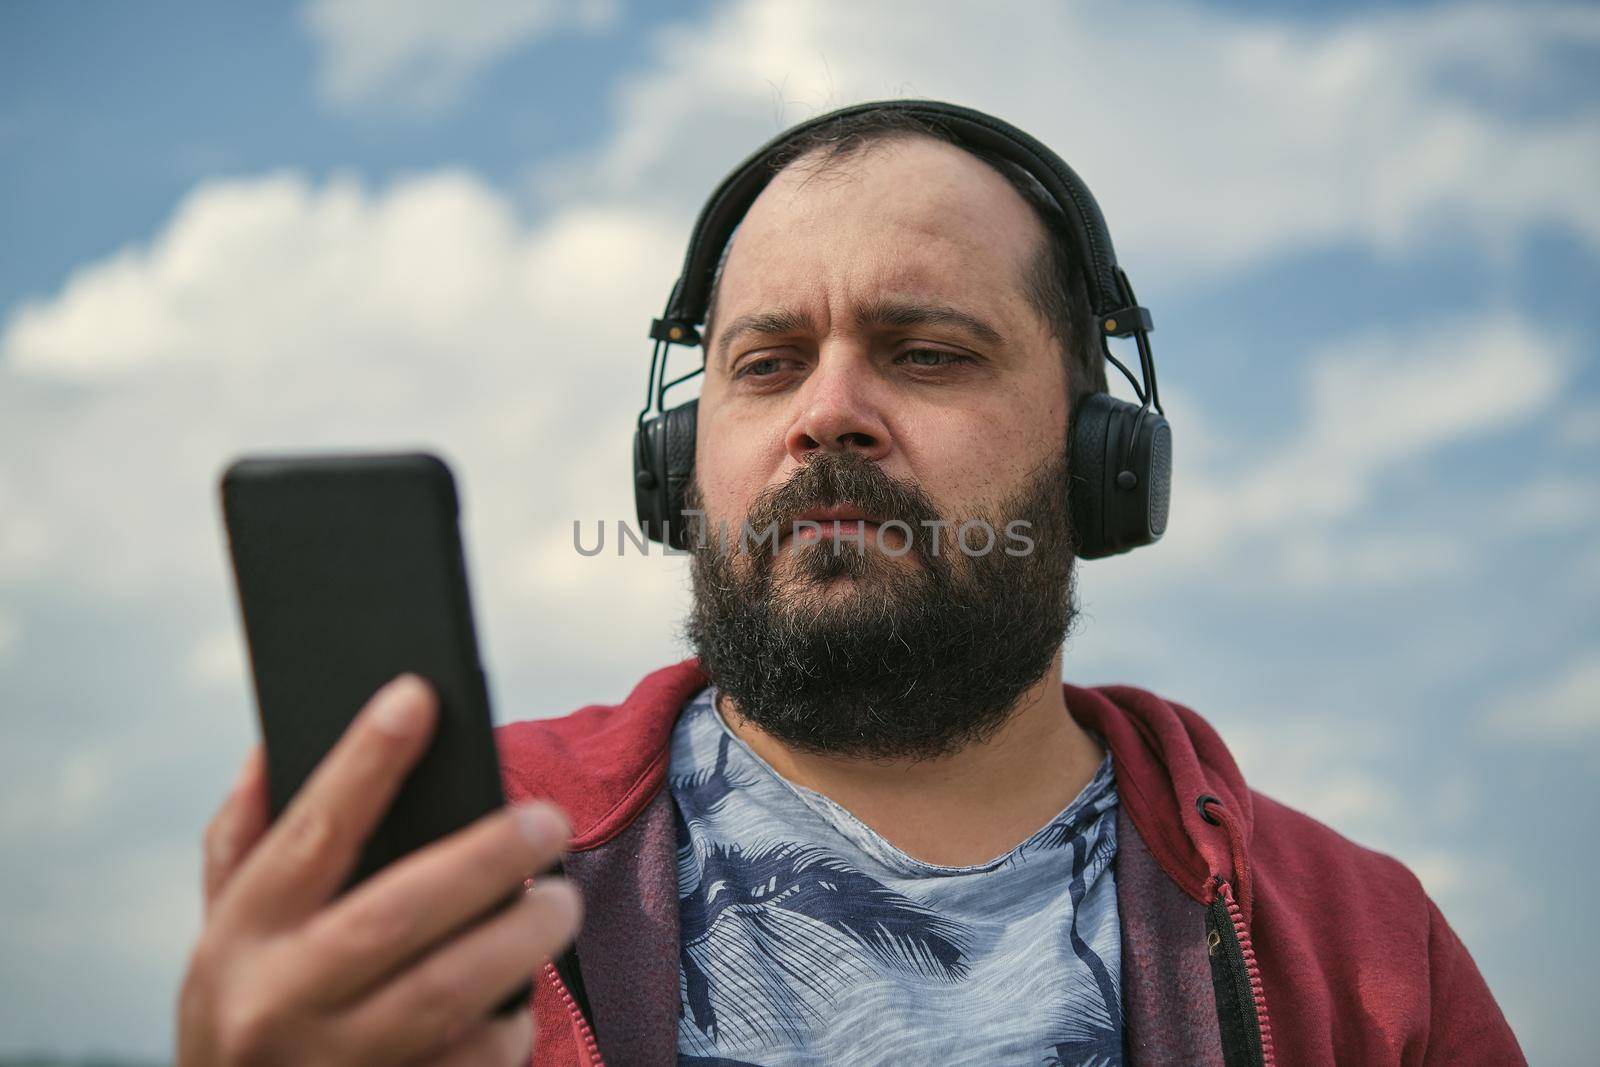 Middle-aged European man in headphones outdoors listening to music against the background of the sky, mobile phone in his hand